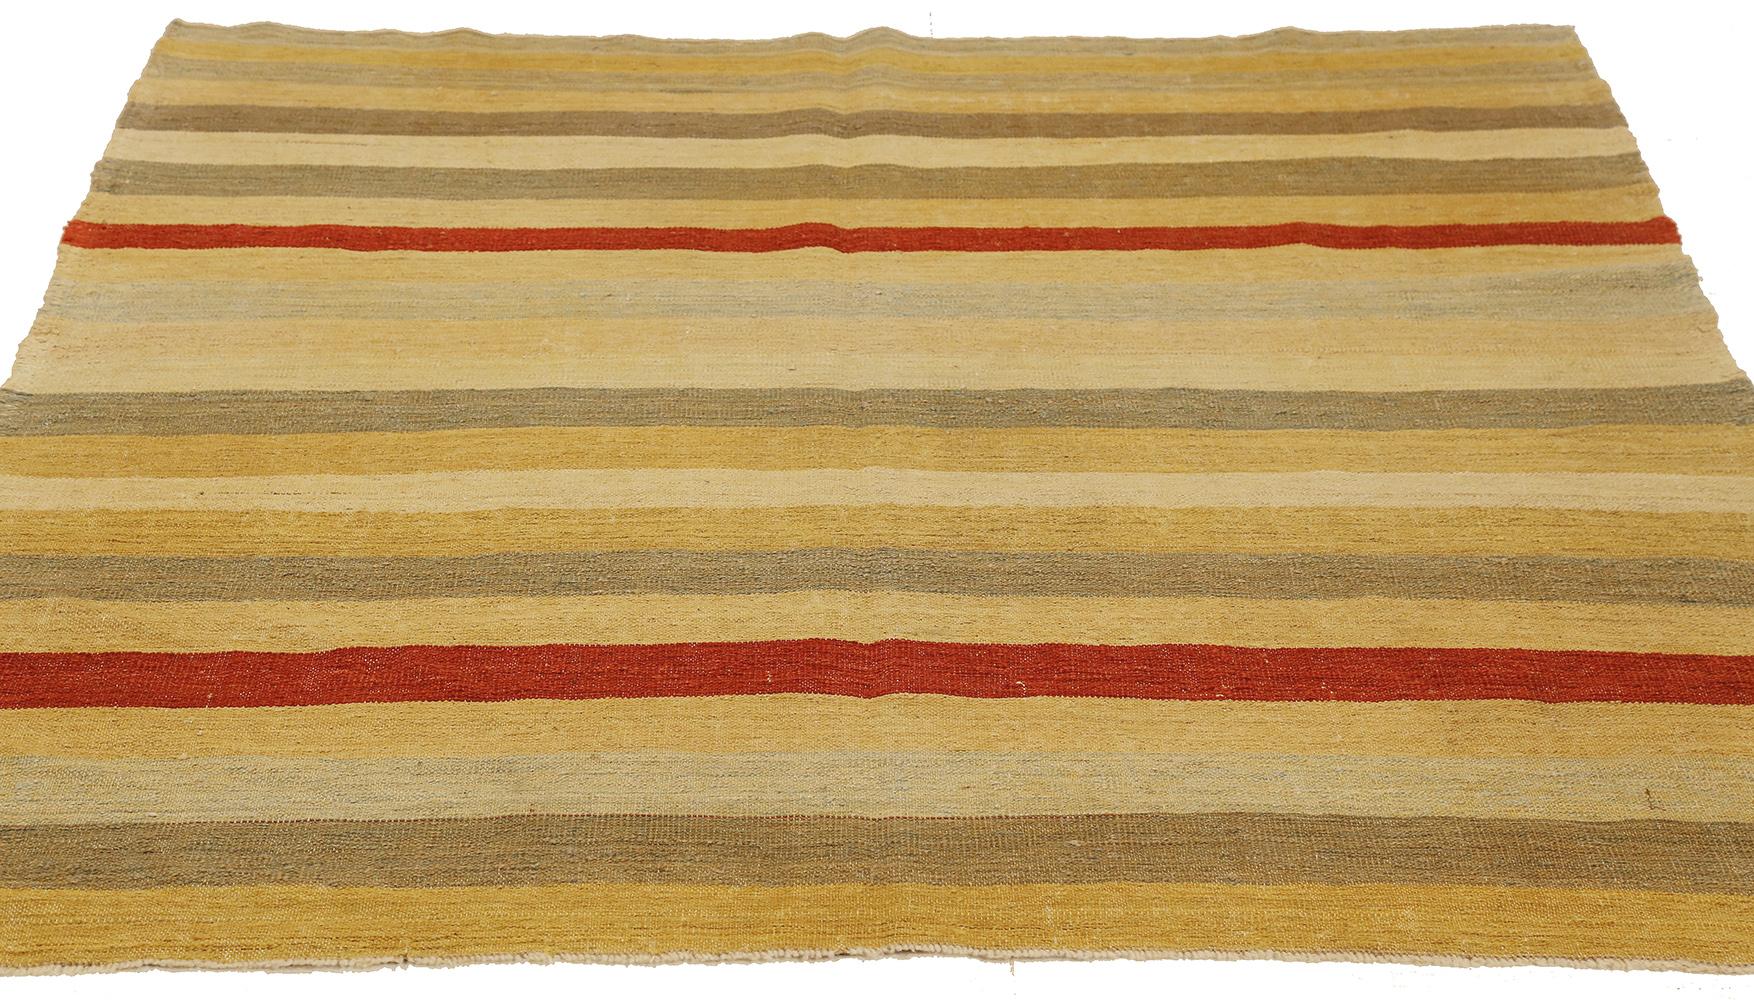 Persian rug handwoven from the finest sheep’s wool and colored with all-natural vegetable dyes that are safe for humans and pets. It’s a Kilim style flat-weave design featuring stripes in red, gray, and brown over an ivory field. It’s a stunning